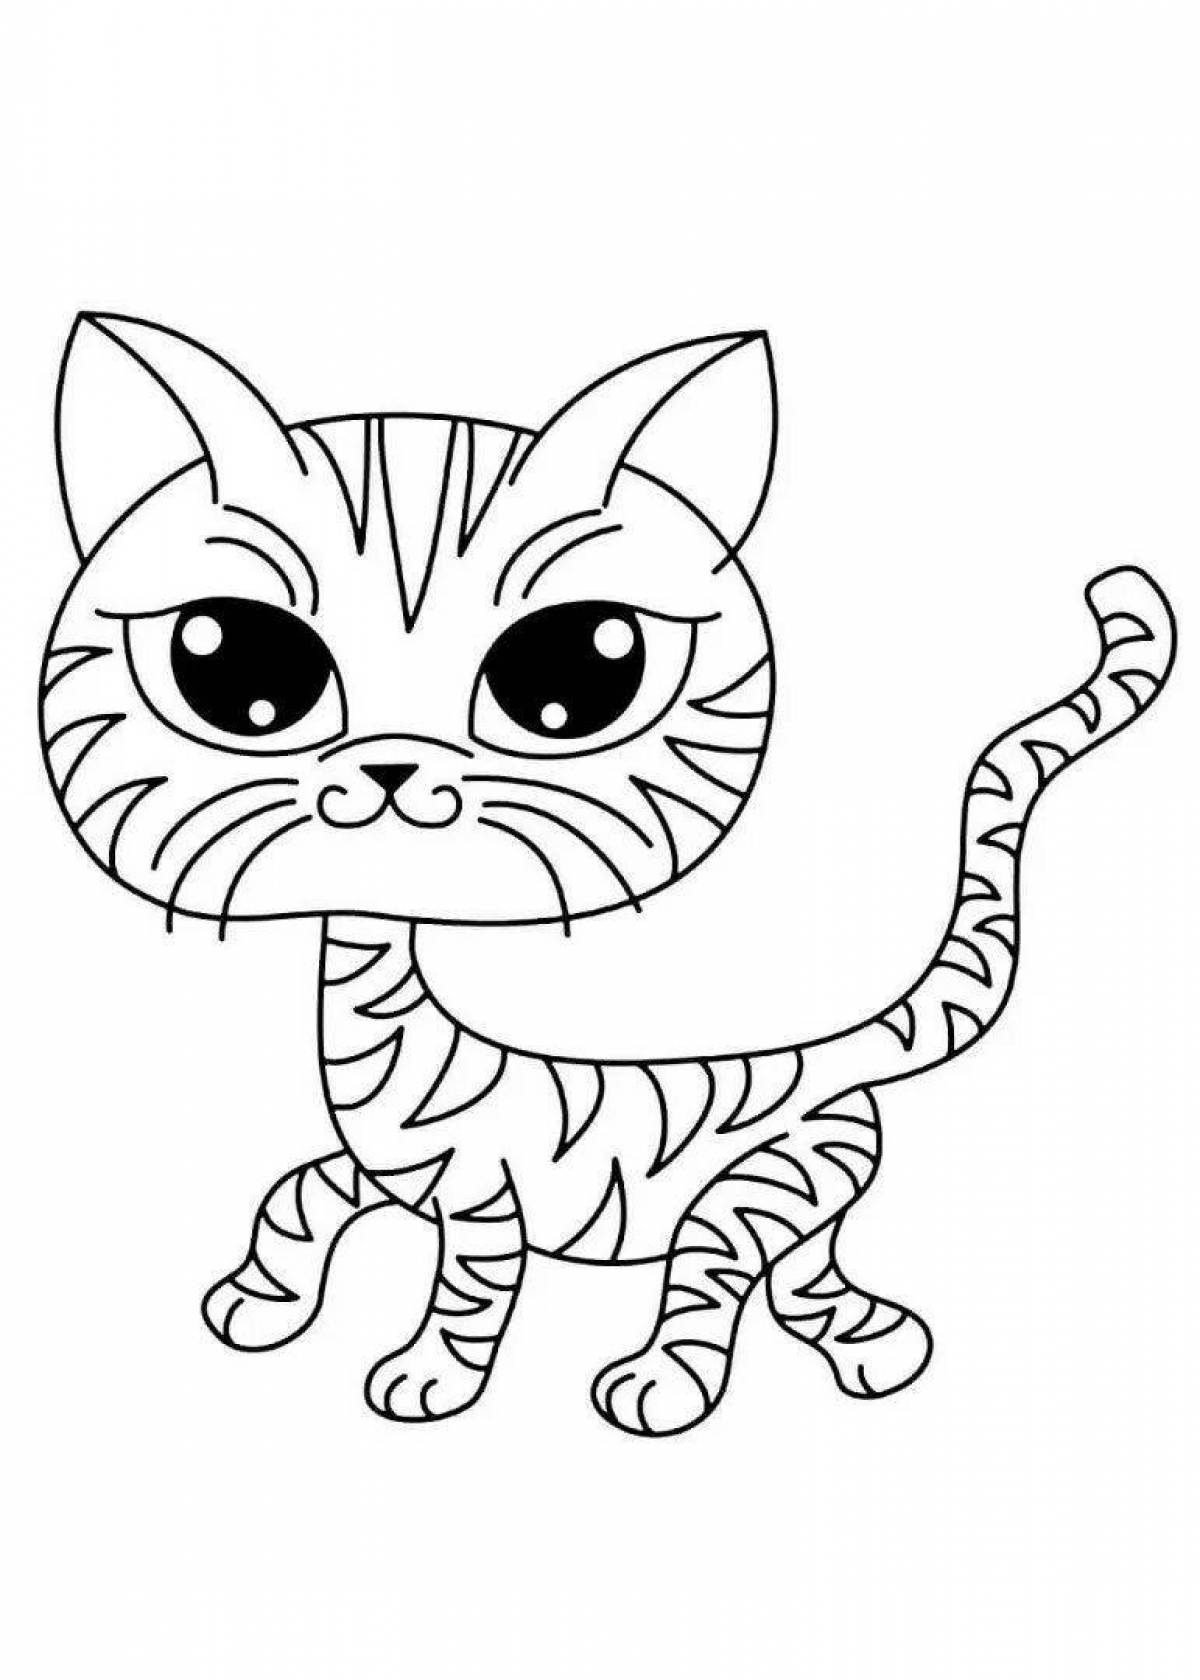 Cute mrr meow coloring